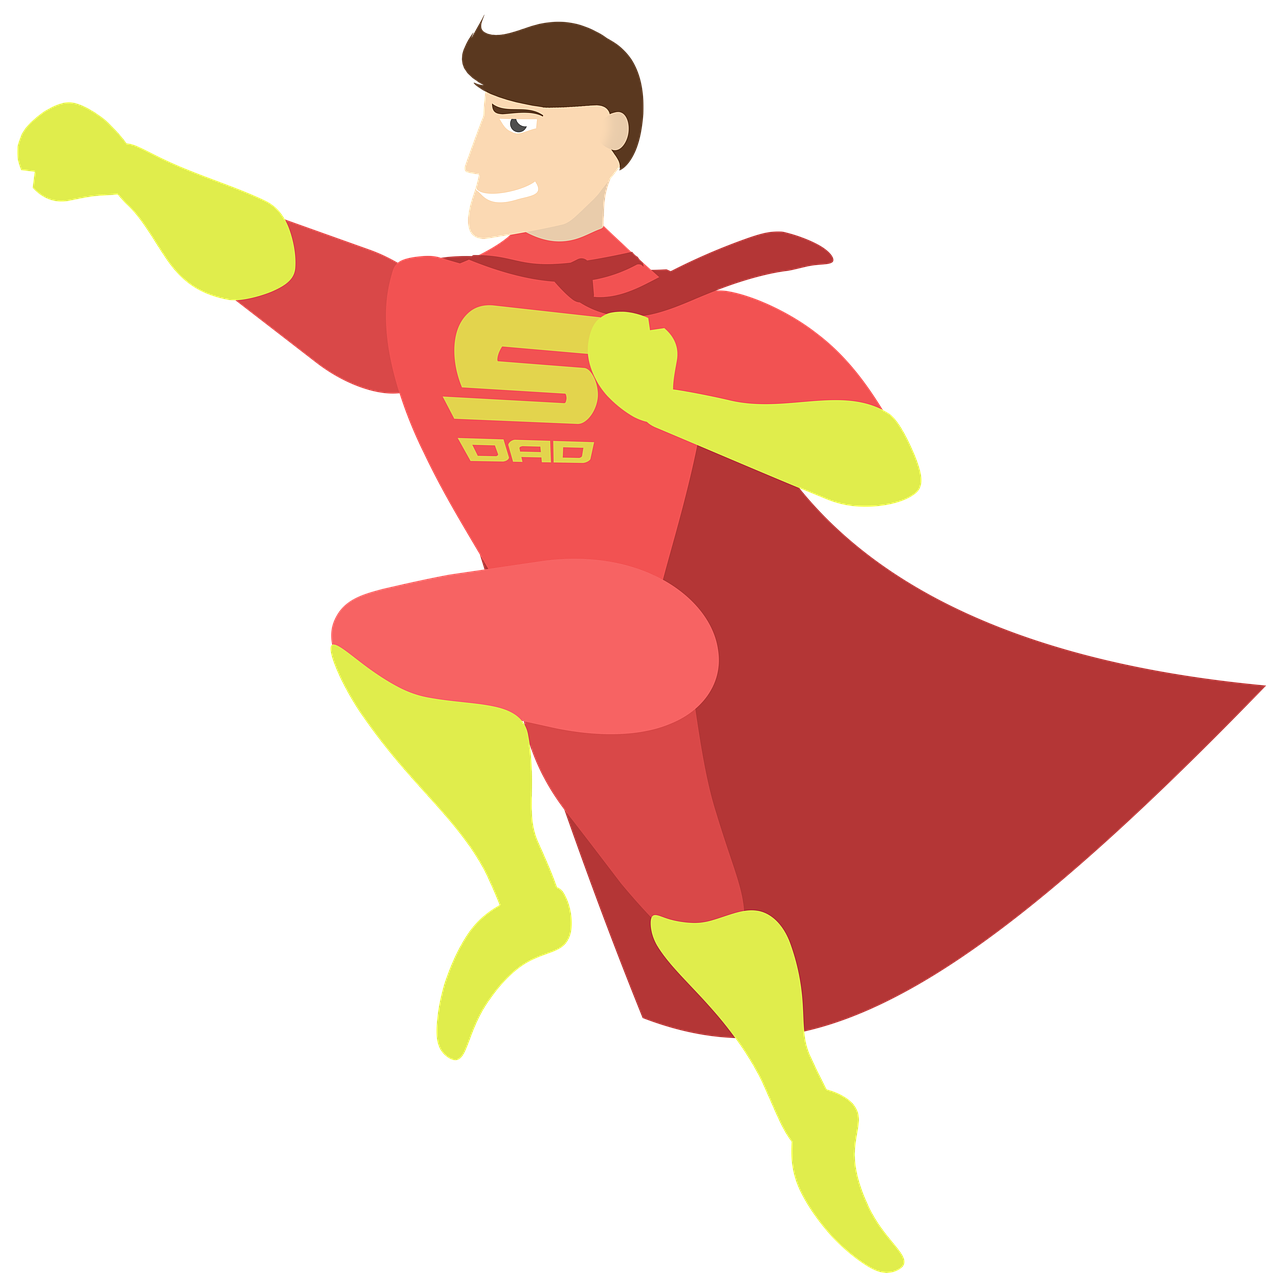 a man dressed as a superhero flying through the air, a digital rendering, superflat, dnd character, giga chad, it is the captain of a crew, wearing red and yellow hero suit